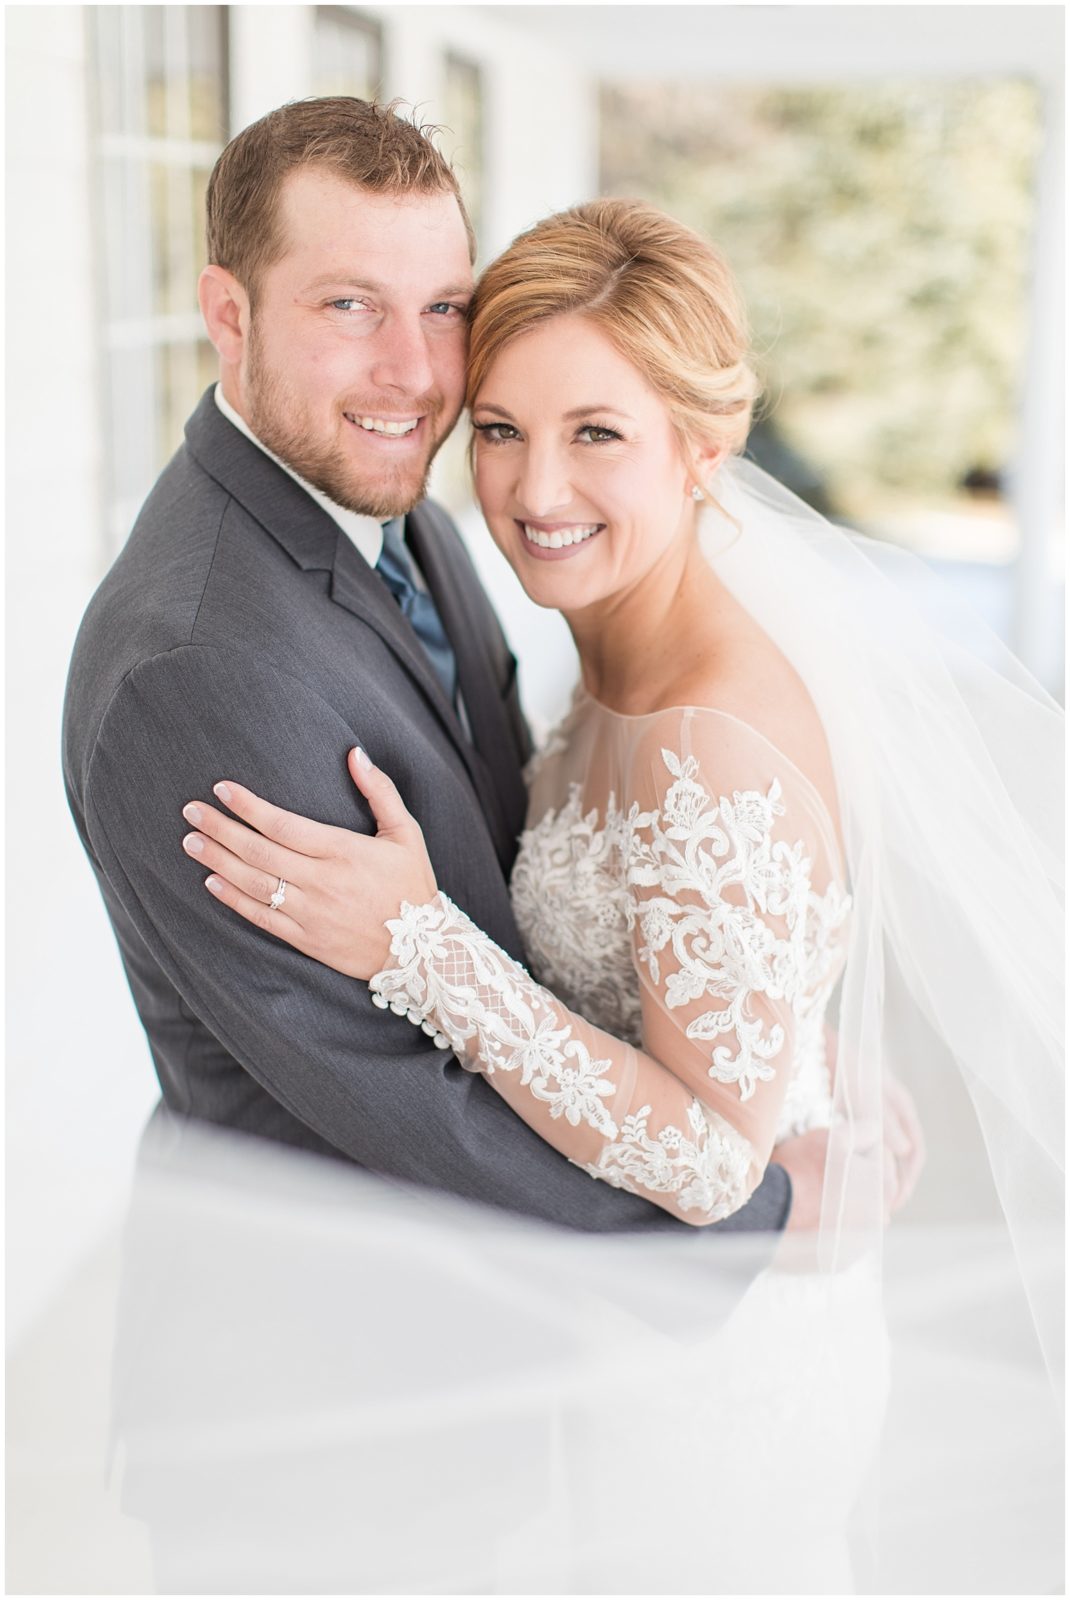 Bride and Groom Portraits, shot by Jessica Brees, photographer and videographer near Sioux City, Iowa